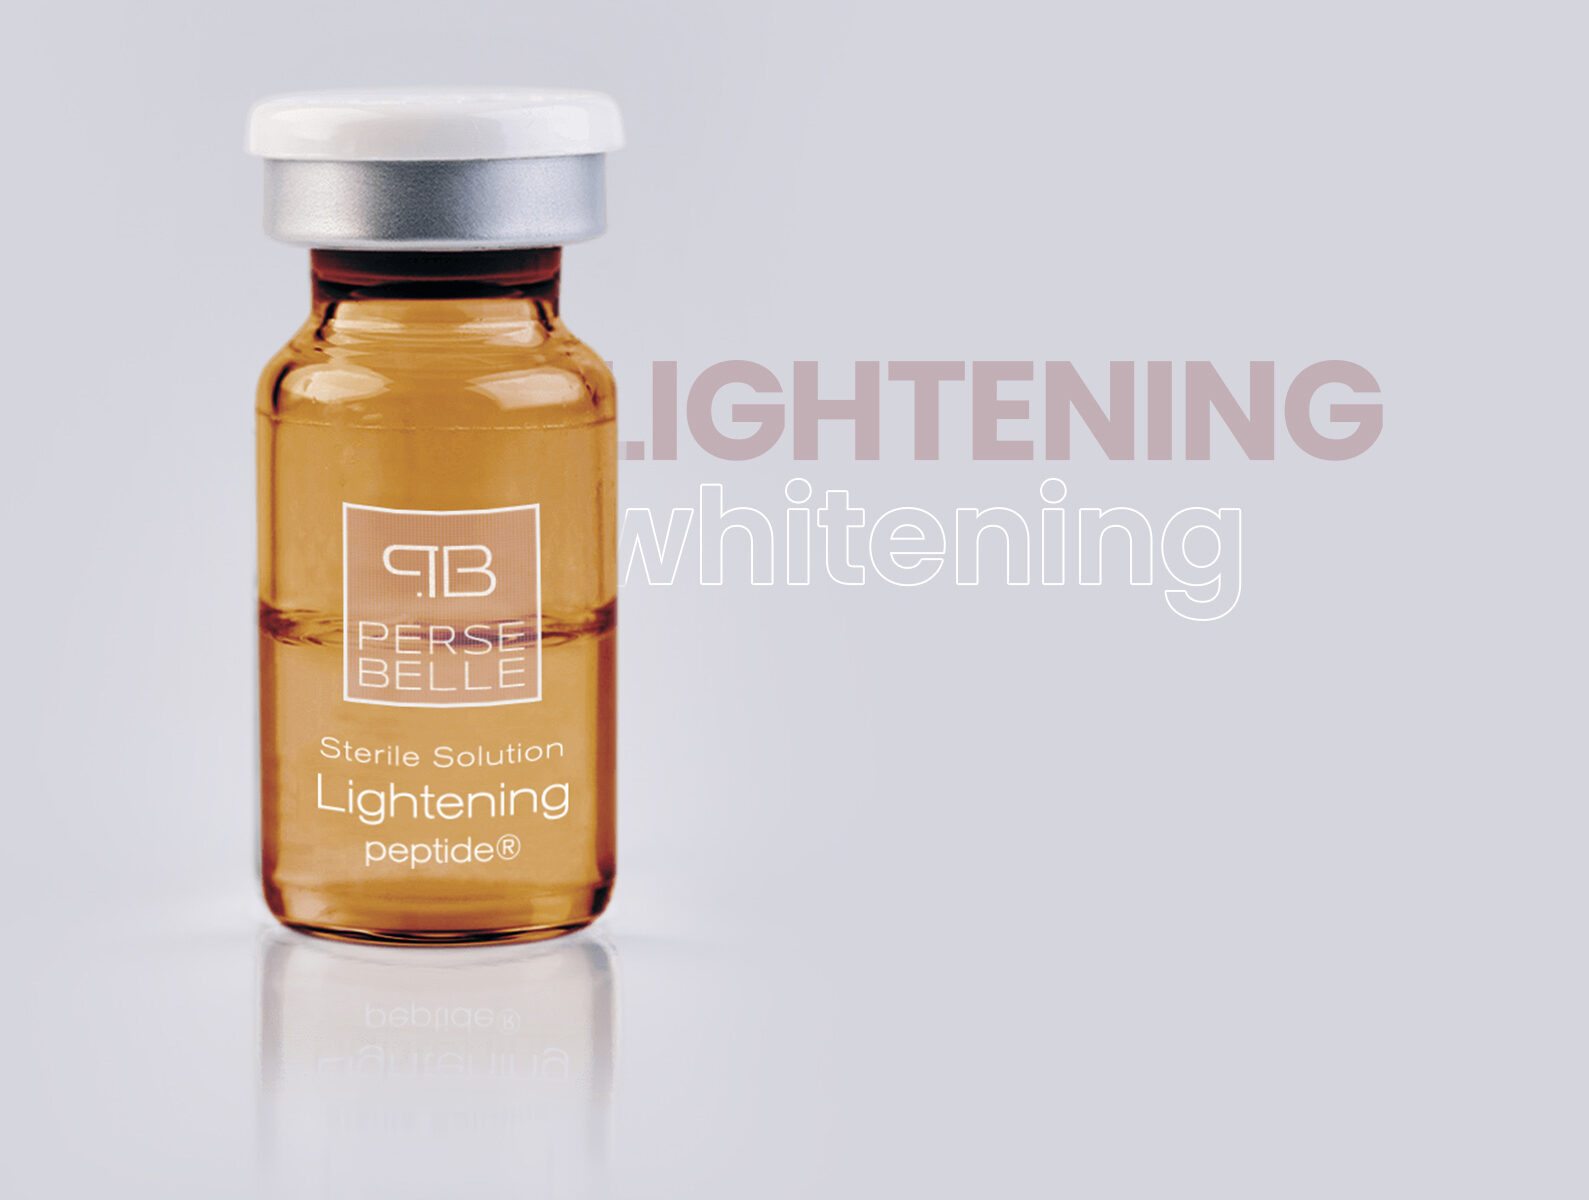 Lighteing peptides mesotherapy - Whitening treatment - Persebelle